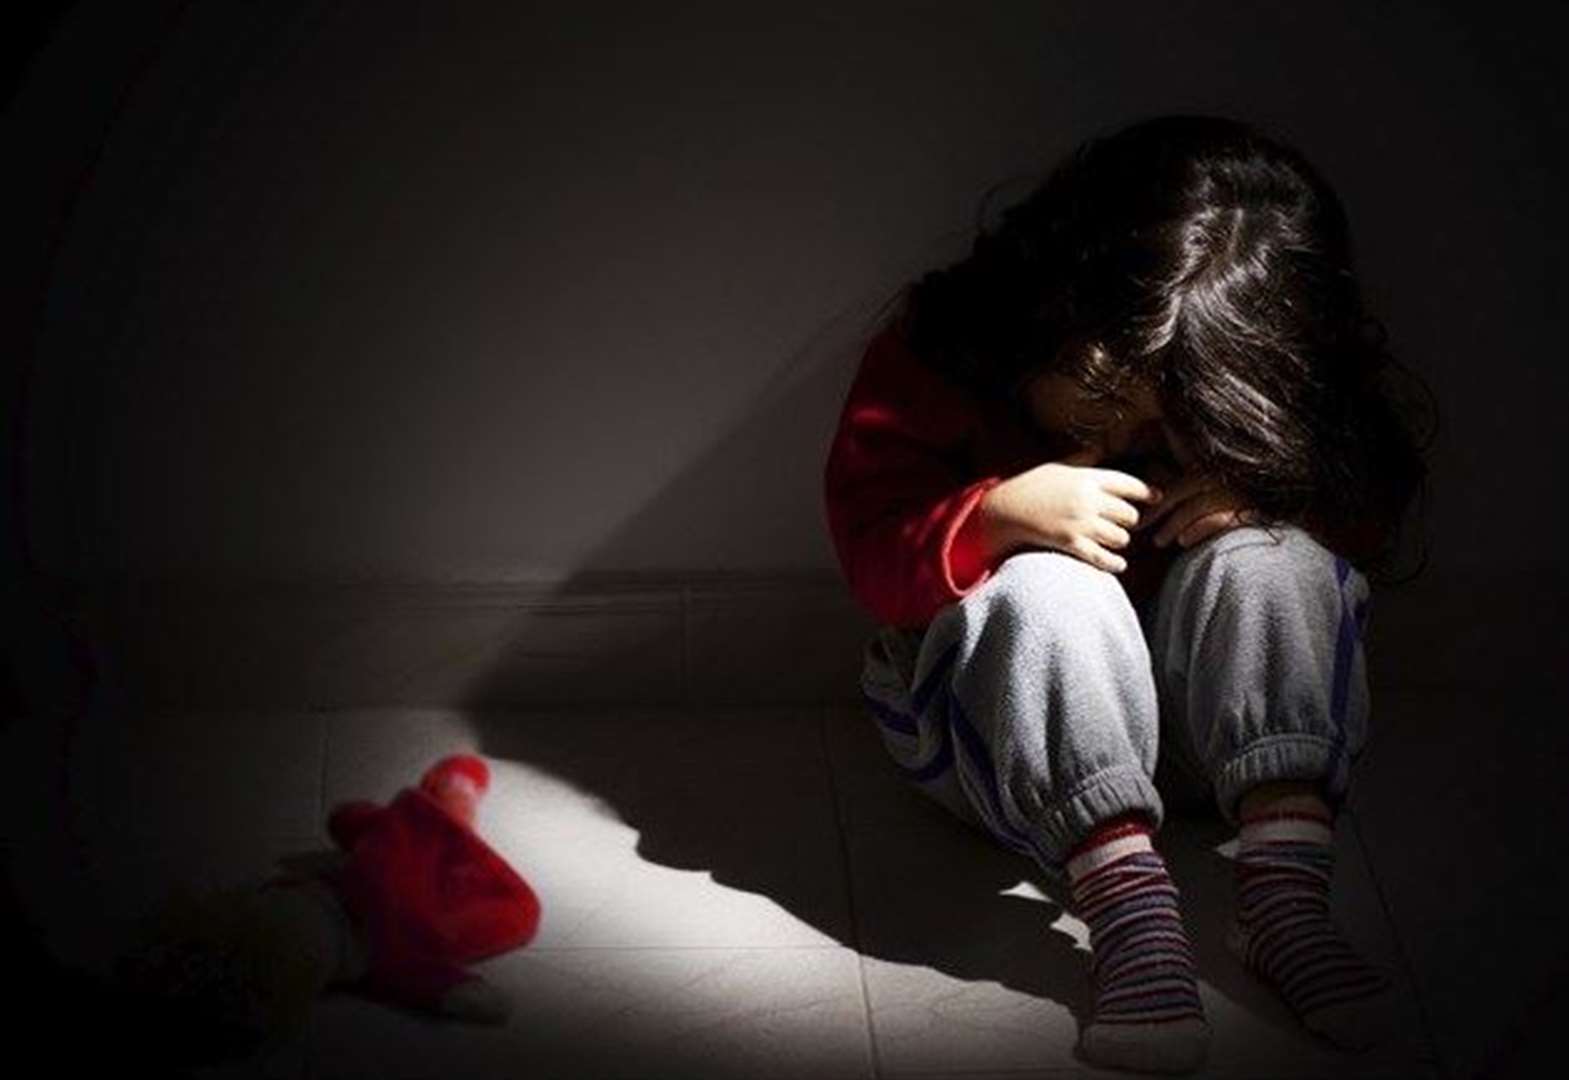 Training offered to schools to support pupils affected by domestic abuse